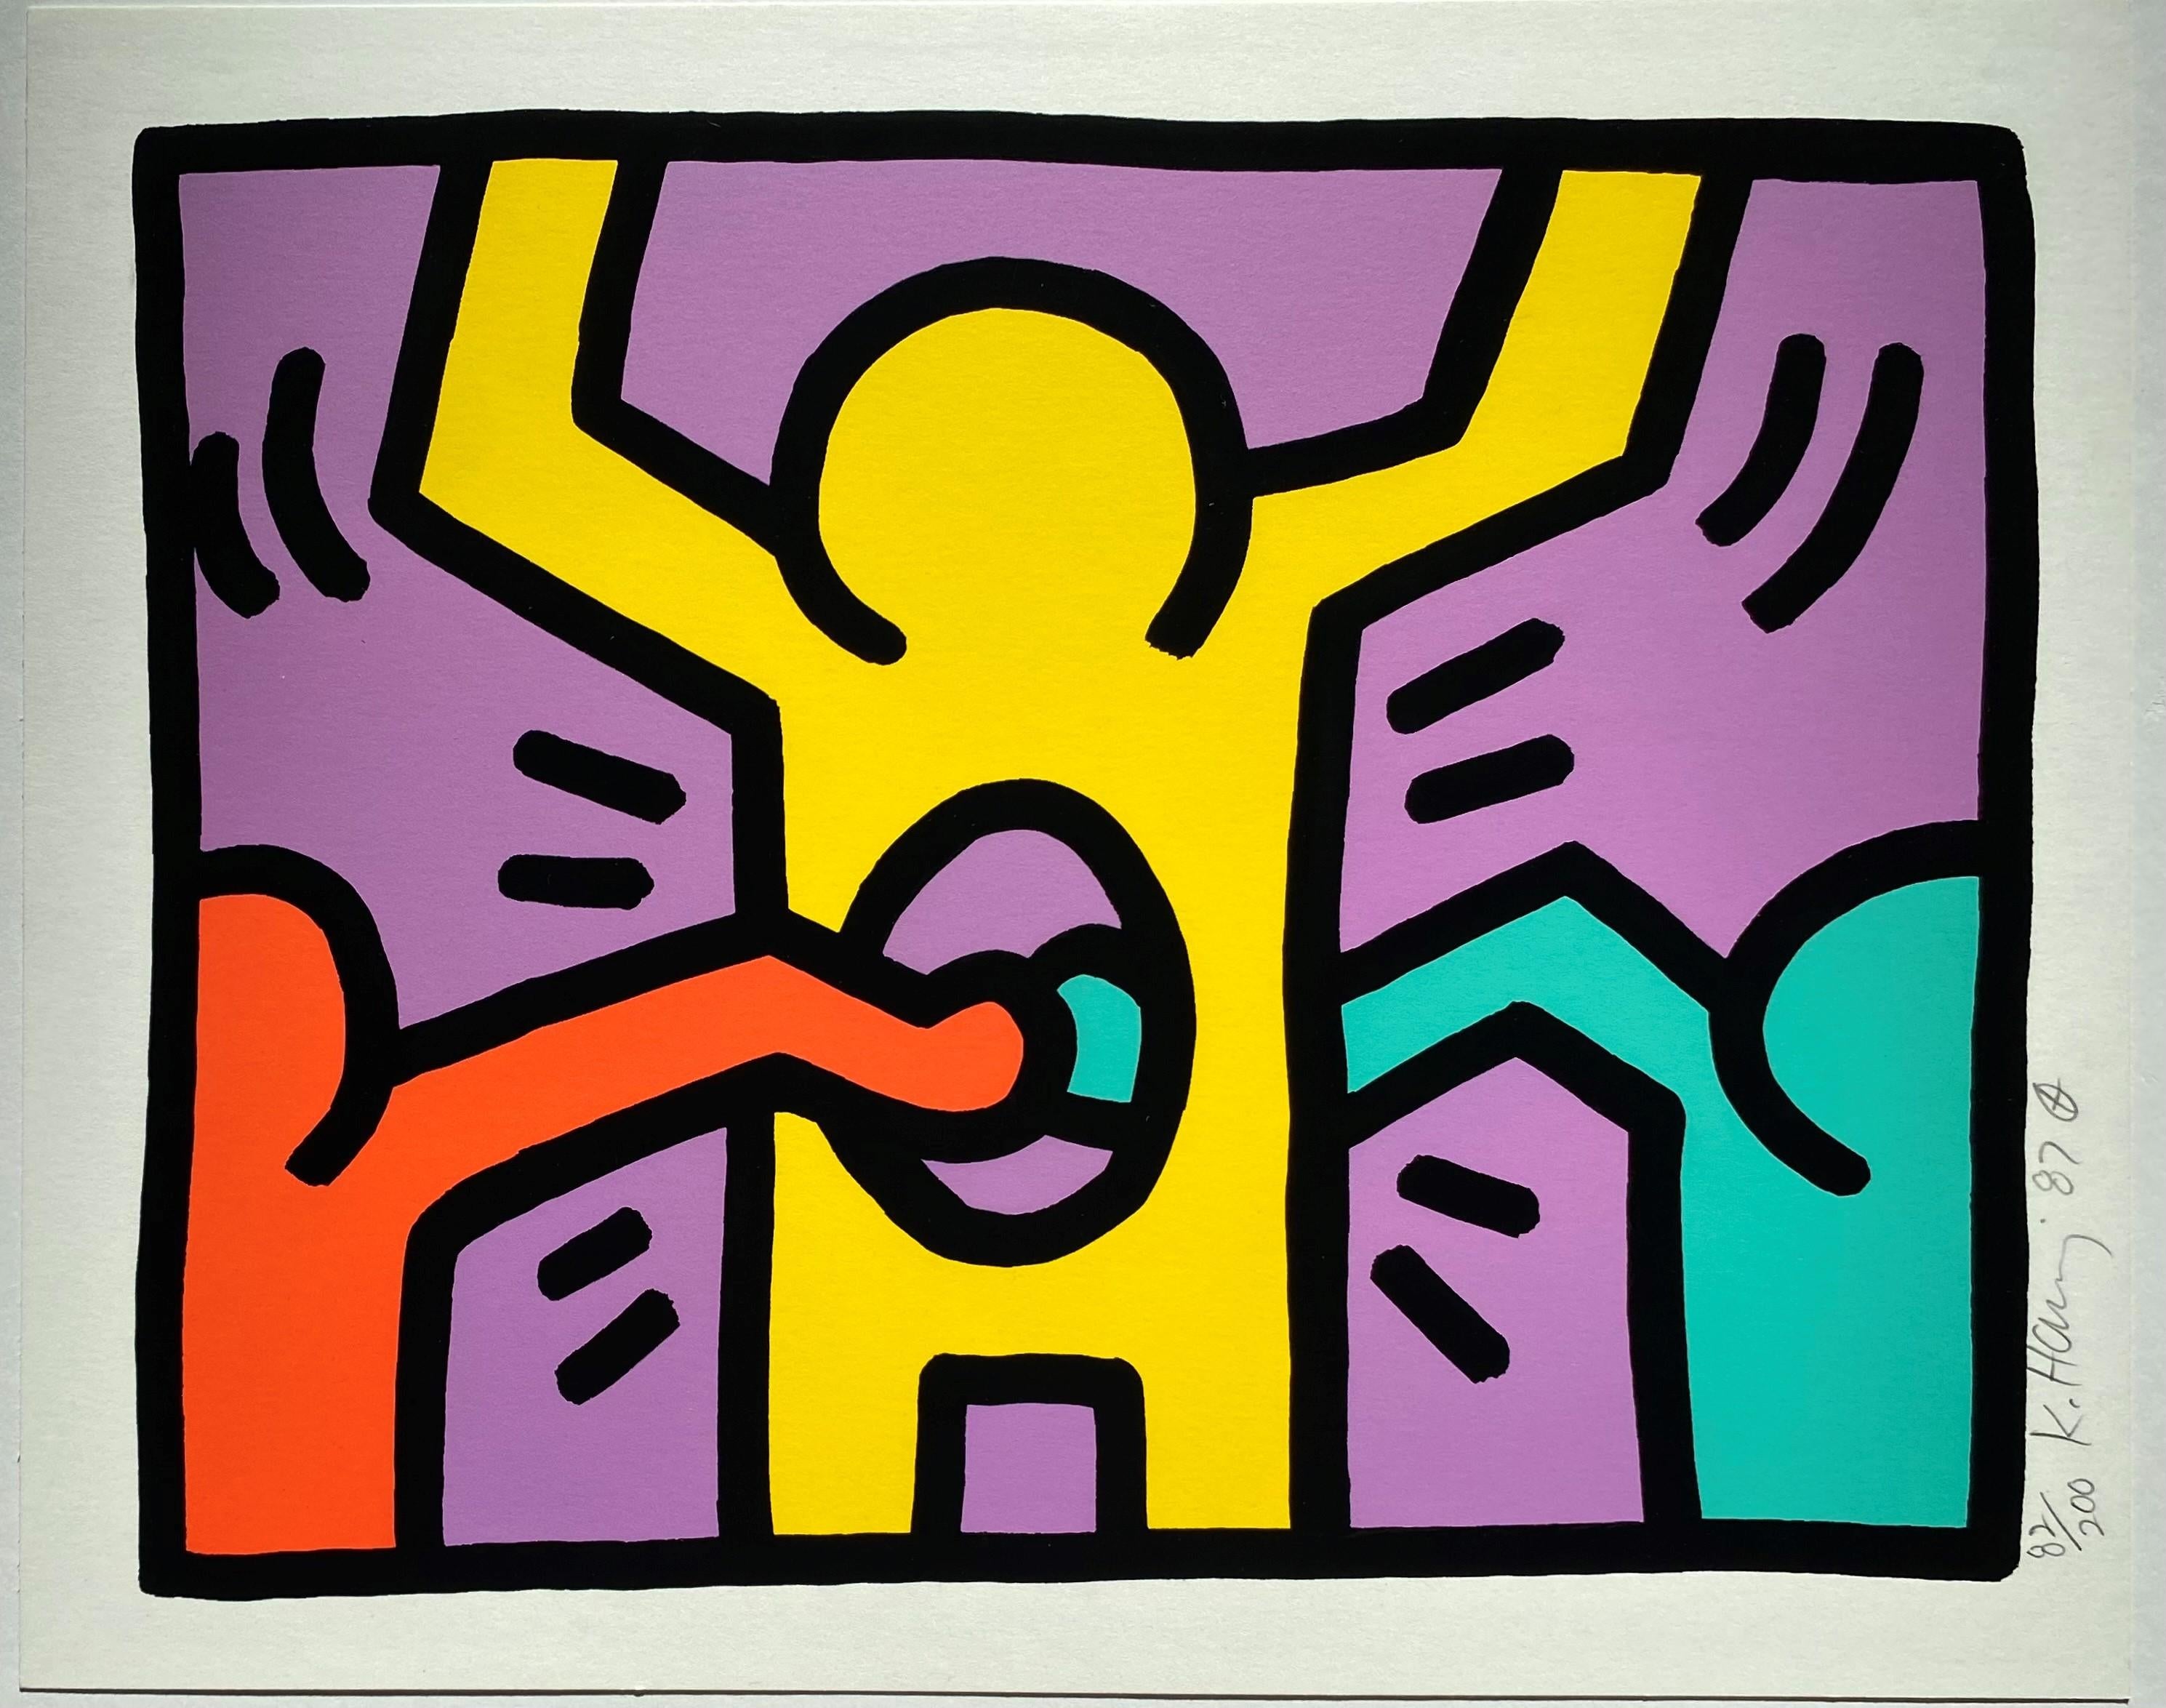 Pop Shop I (3) - Print by Keith Haring